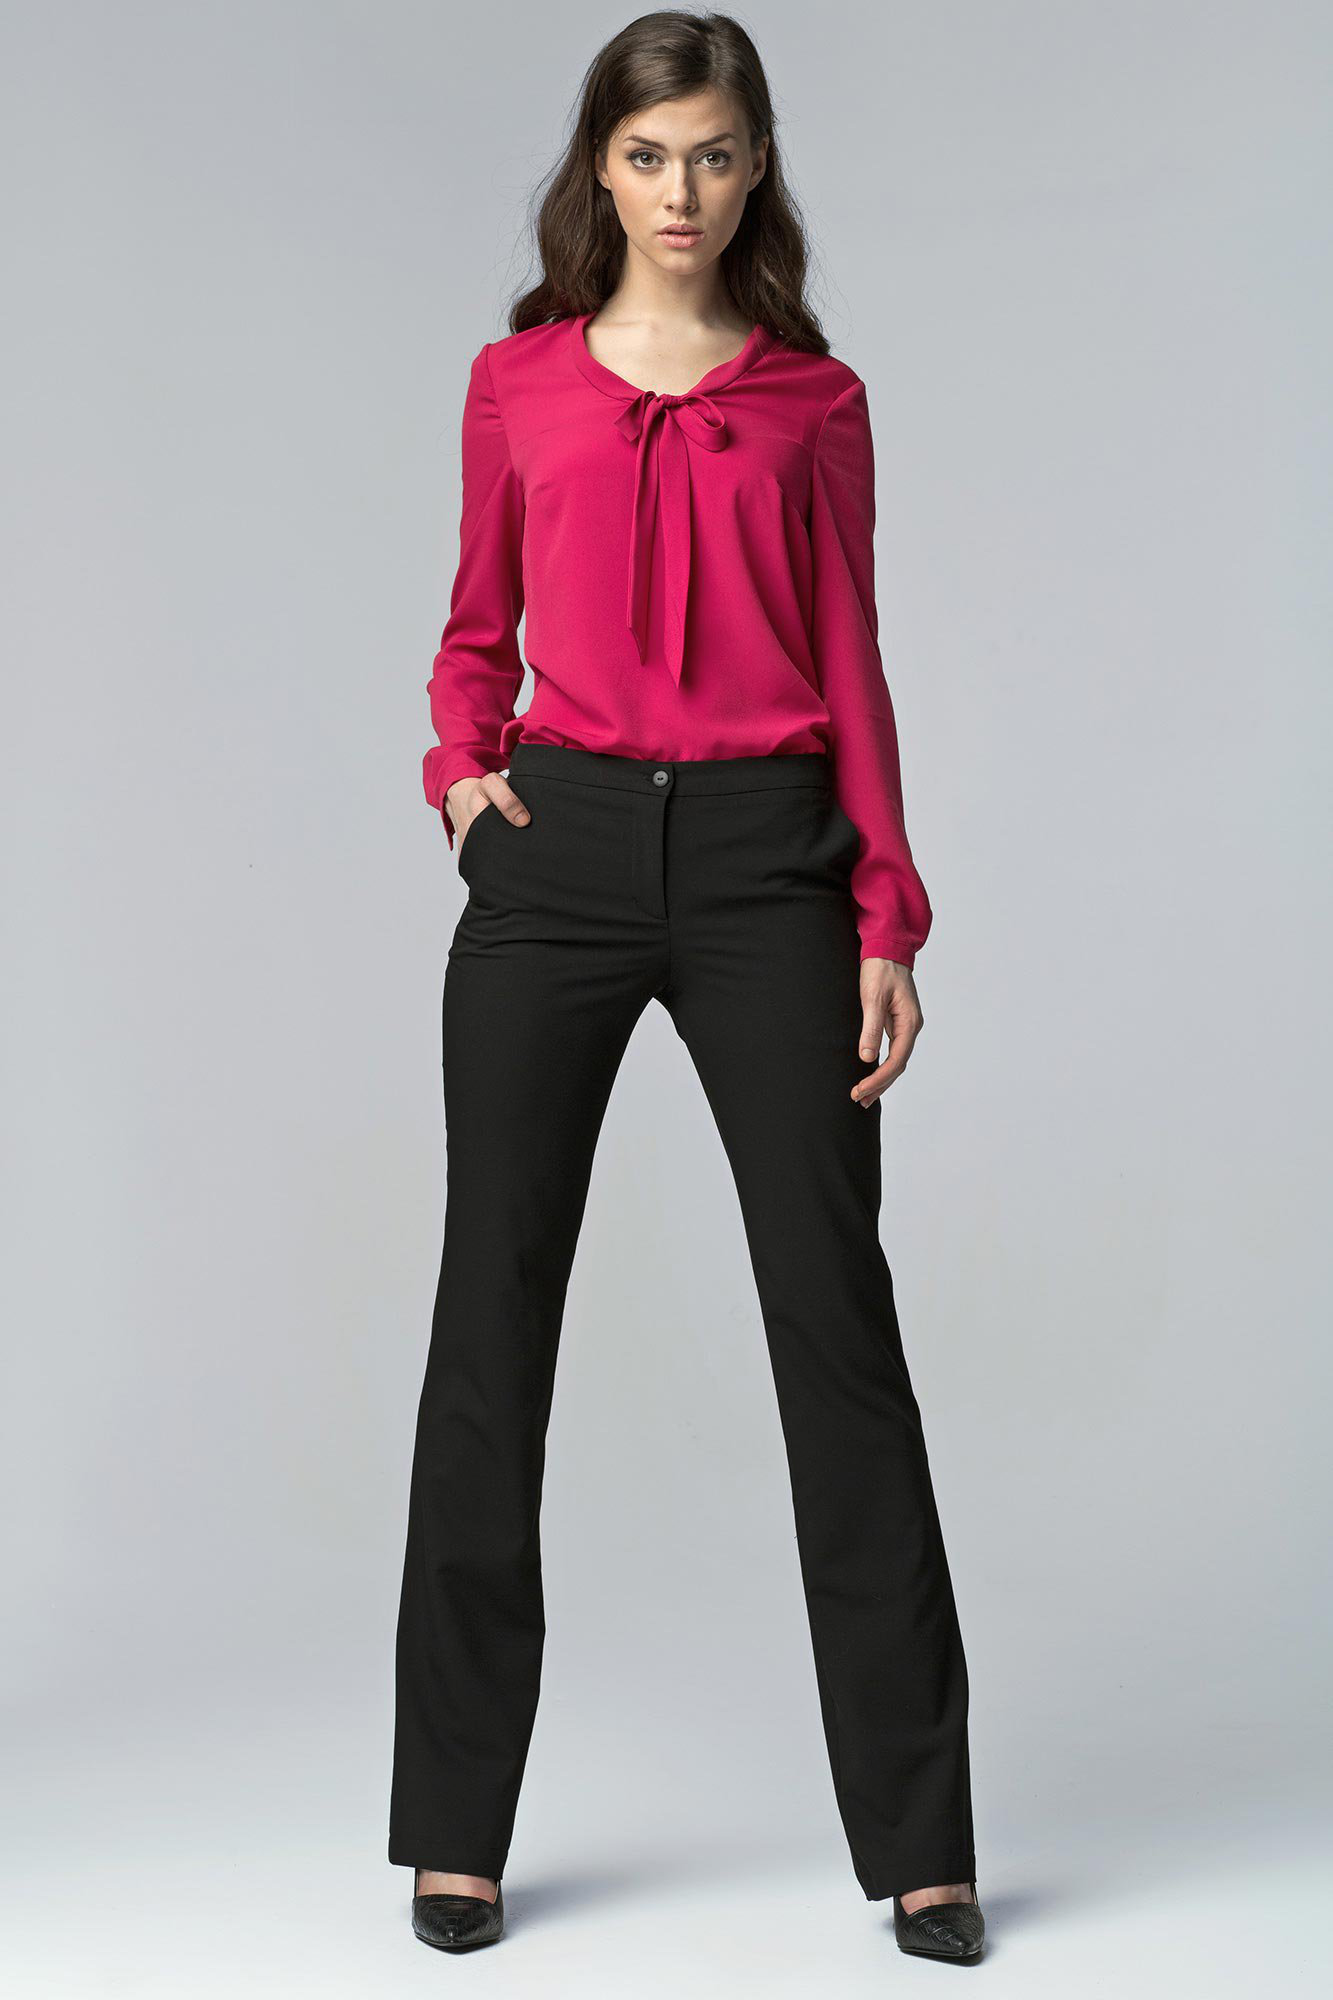 Straight cut pants for women: Chic and casual